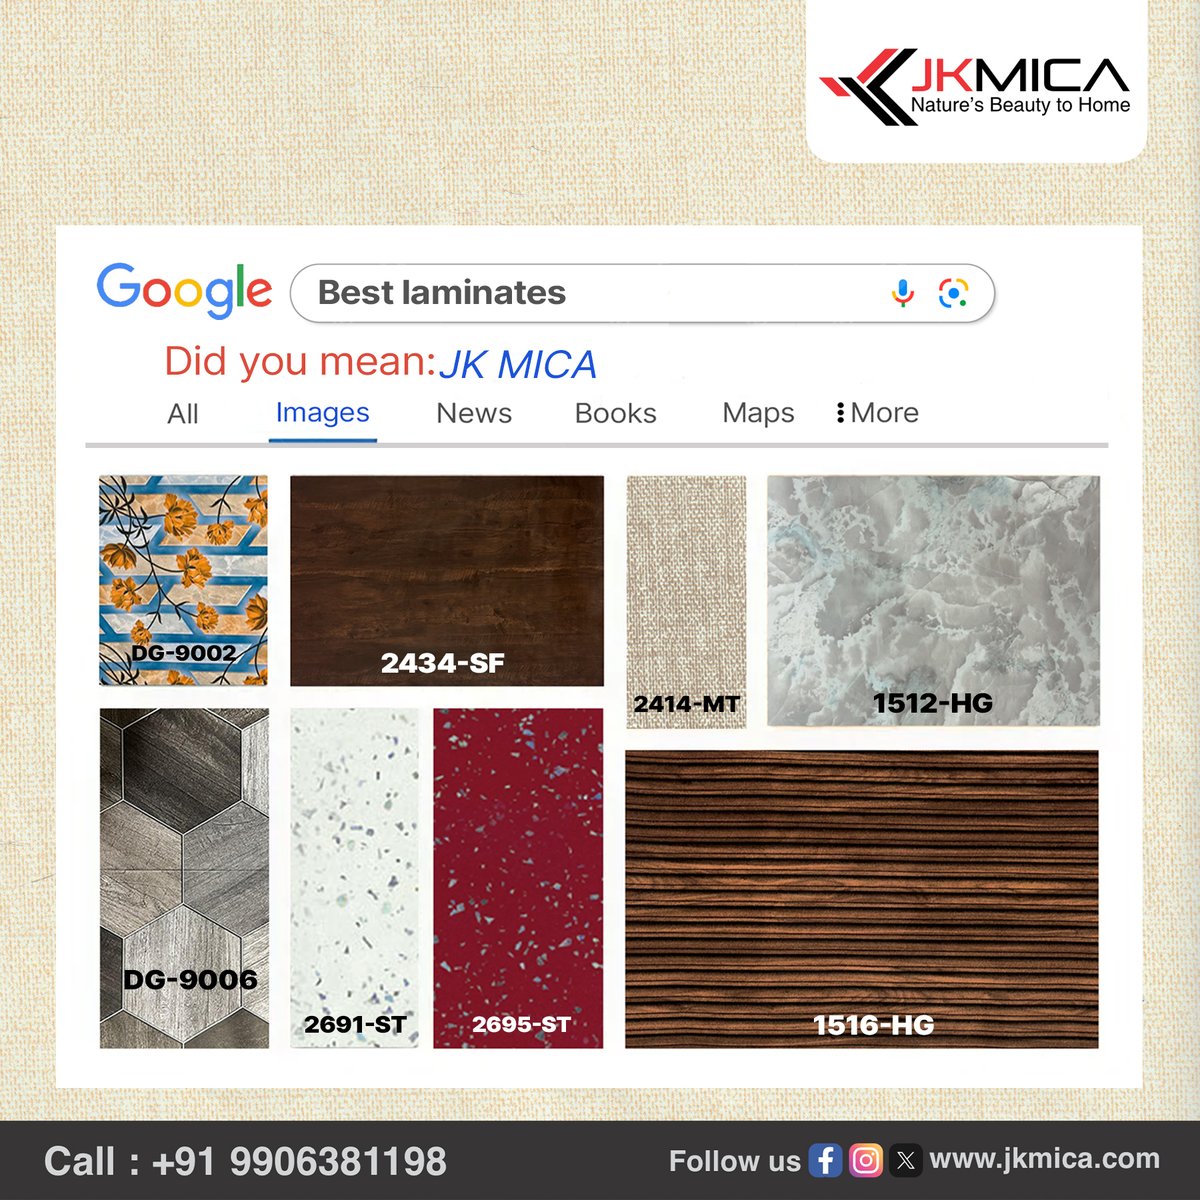 Discover the beauty of JK Mica's best laminates! Elevate your space with unmatched quality and style. Transform your home into a masterpiece with JK Mica today!
#JKMica #BestLaminates #HomeTransformation #LuxuryDesign #kitchen #LaminateLuxury #DurabilityMeetsBeauty #laminate